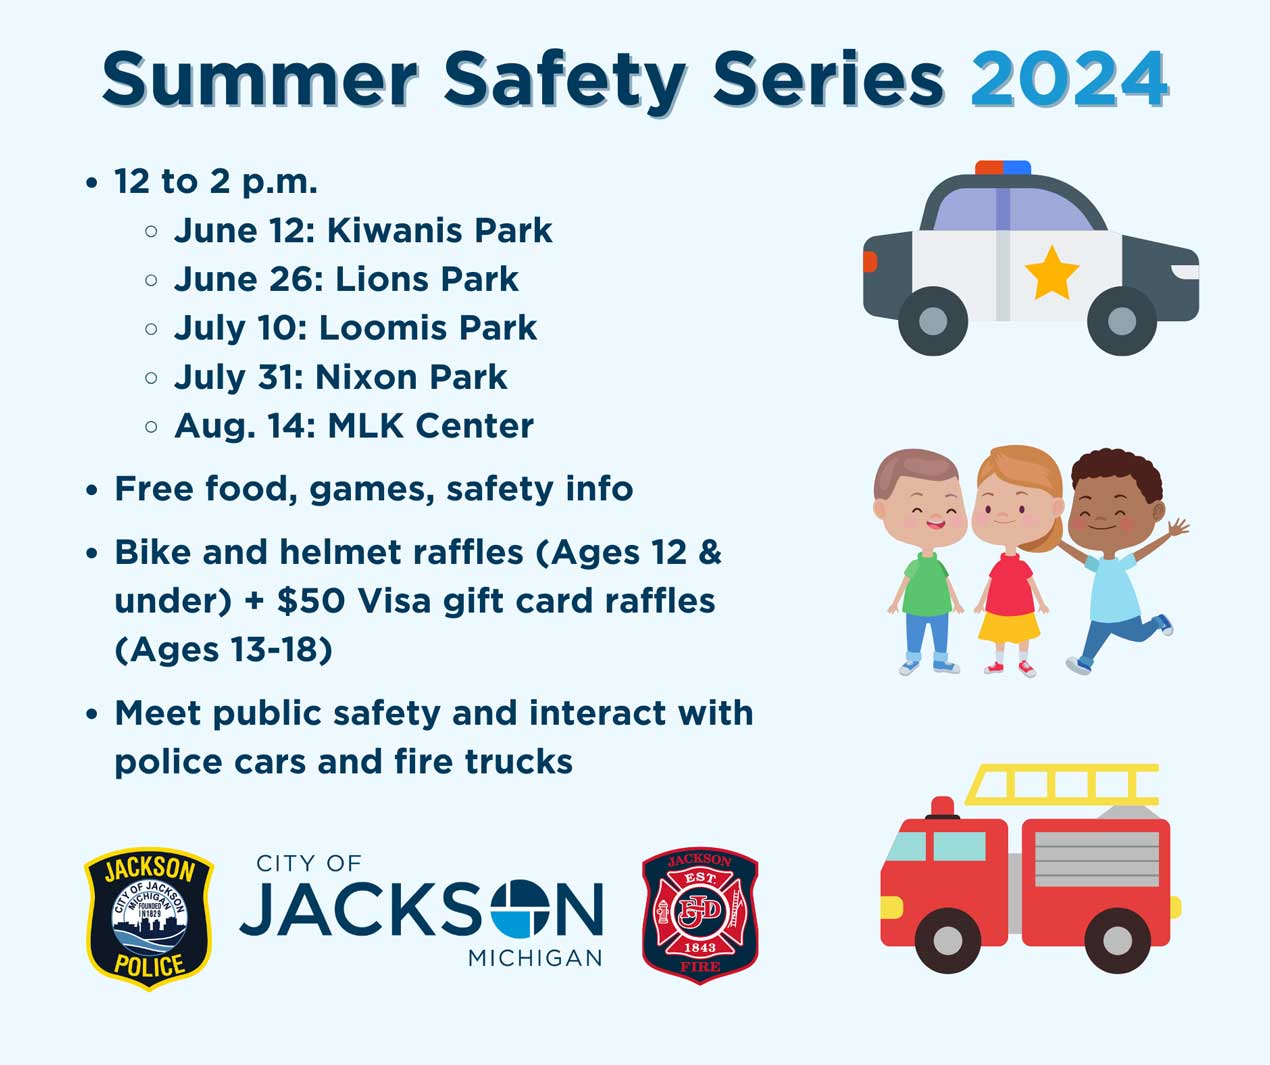 City of Jackson Launching Summer Safety Series Events in Neighborhood Parks